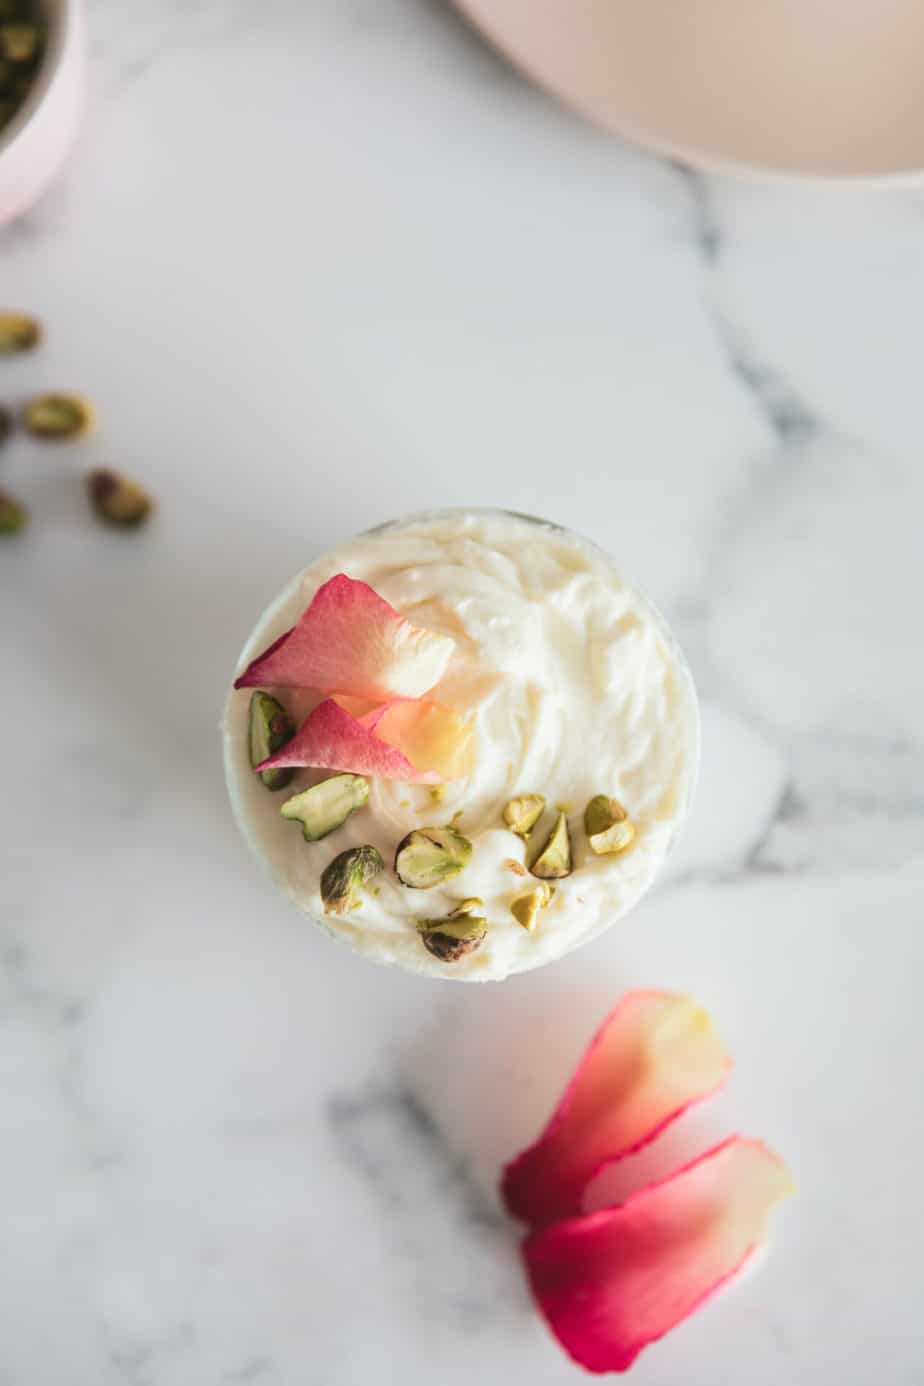 Is there anything in life more deliciously decadent than fluffy white chocolate mousse?! It is so indulgent and so easy to make - truly a perfect dessert. And this Rose & White Chocolate Mousse has a simple sweet, floral twist to it which is just magical.